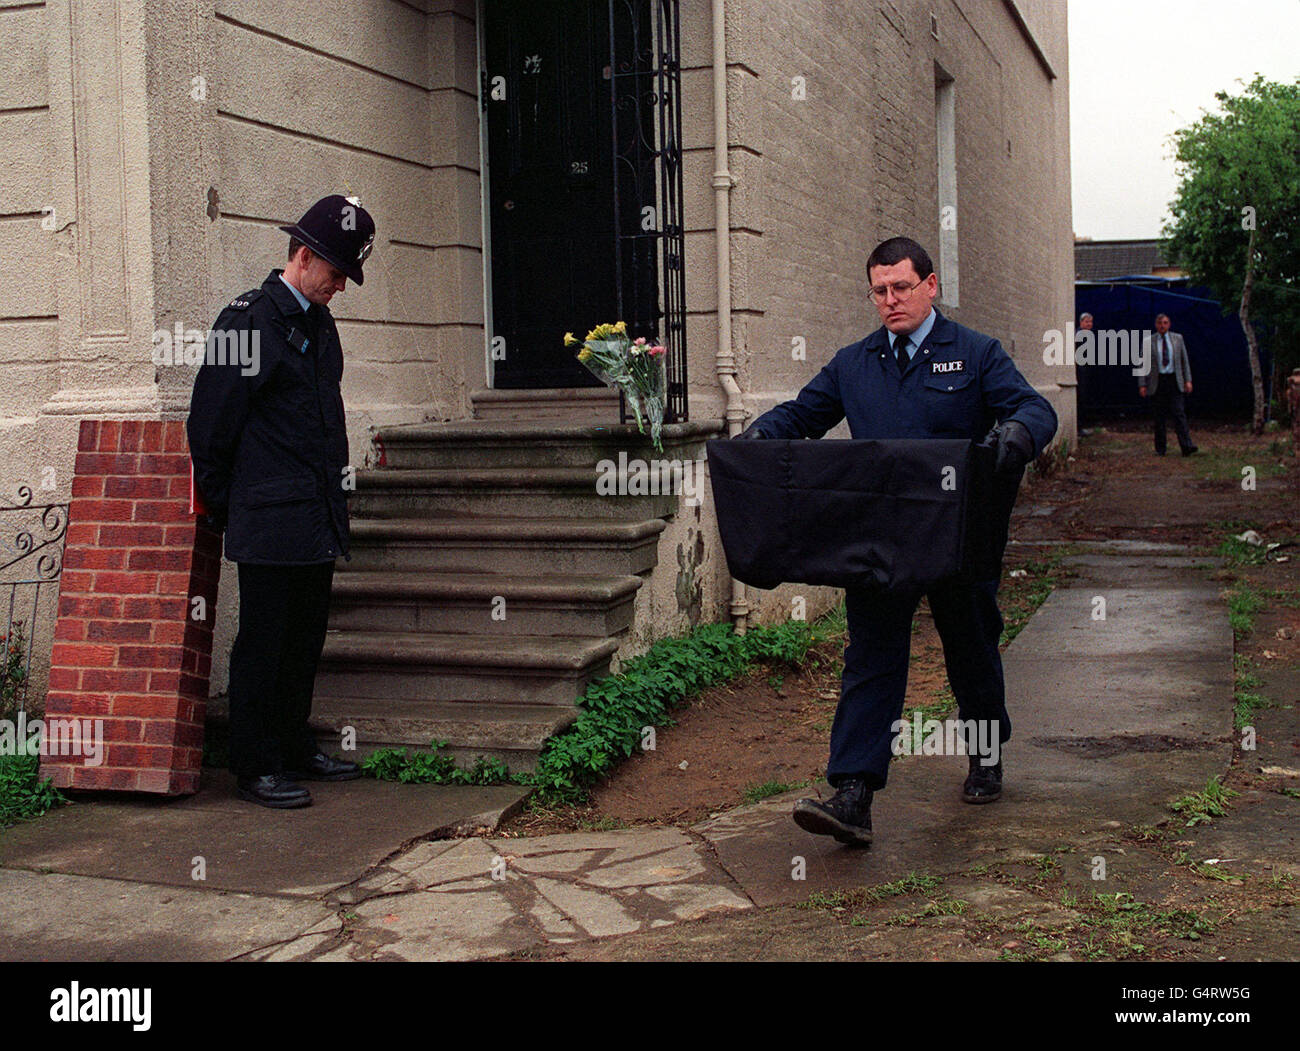 A policeman carries the remains of a young woman from the former home of Frederick West. 25 Midland Road, Gloucester. Fred West has been charged with the murders of 10 women. Stock Photo